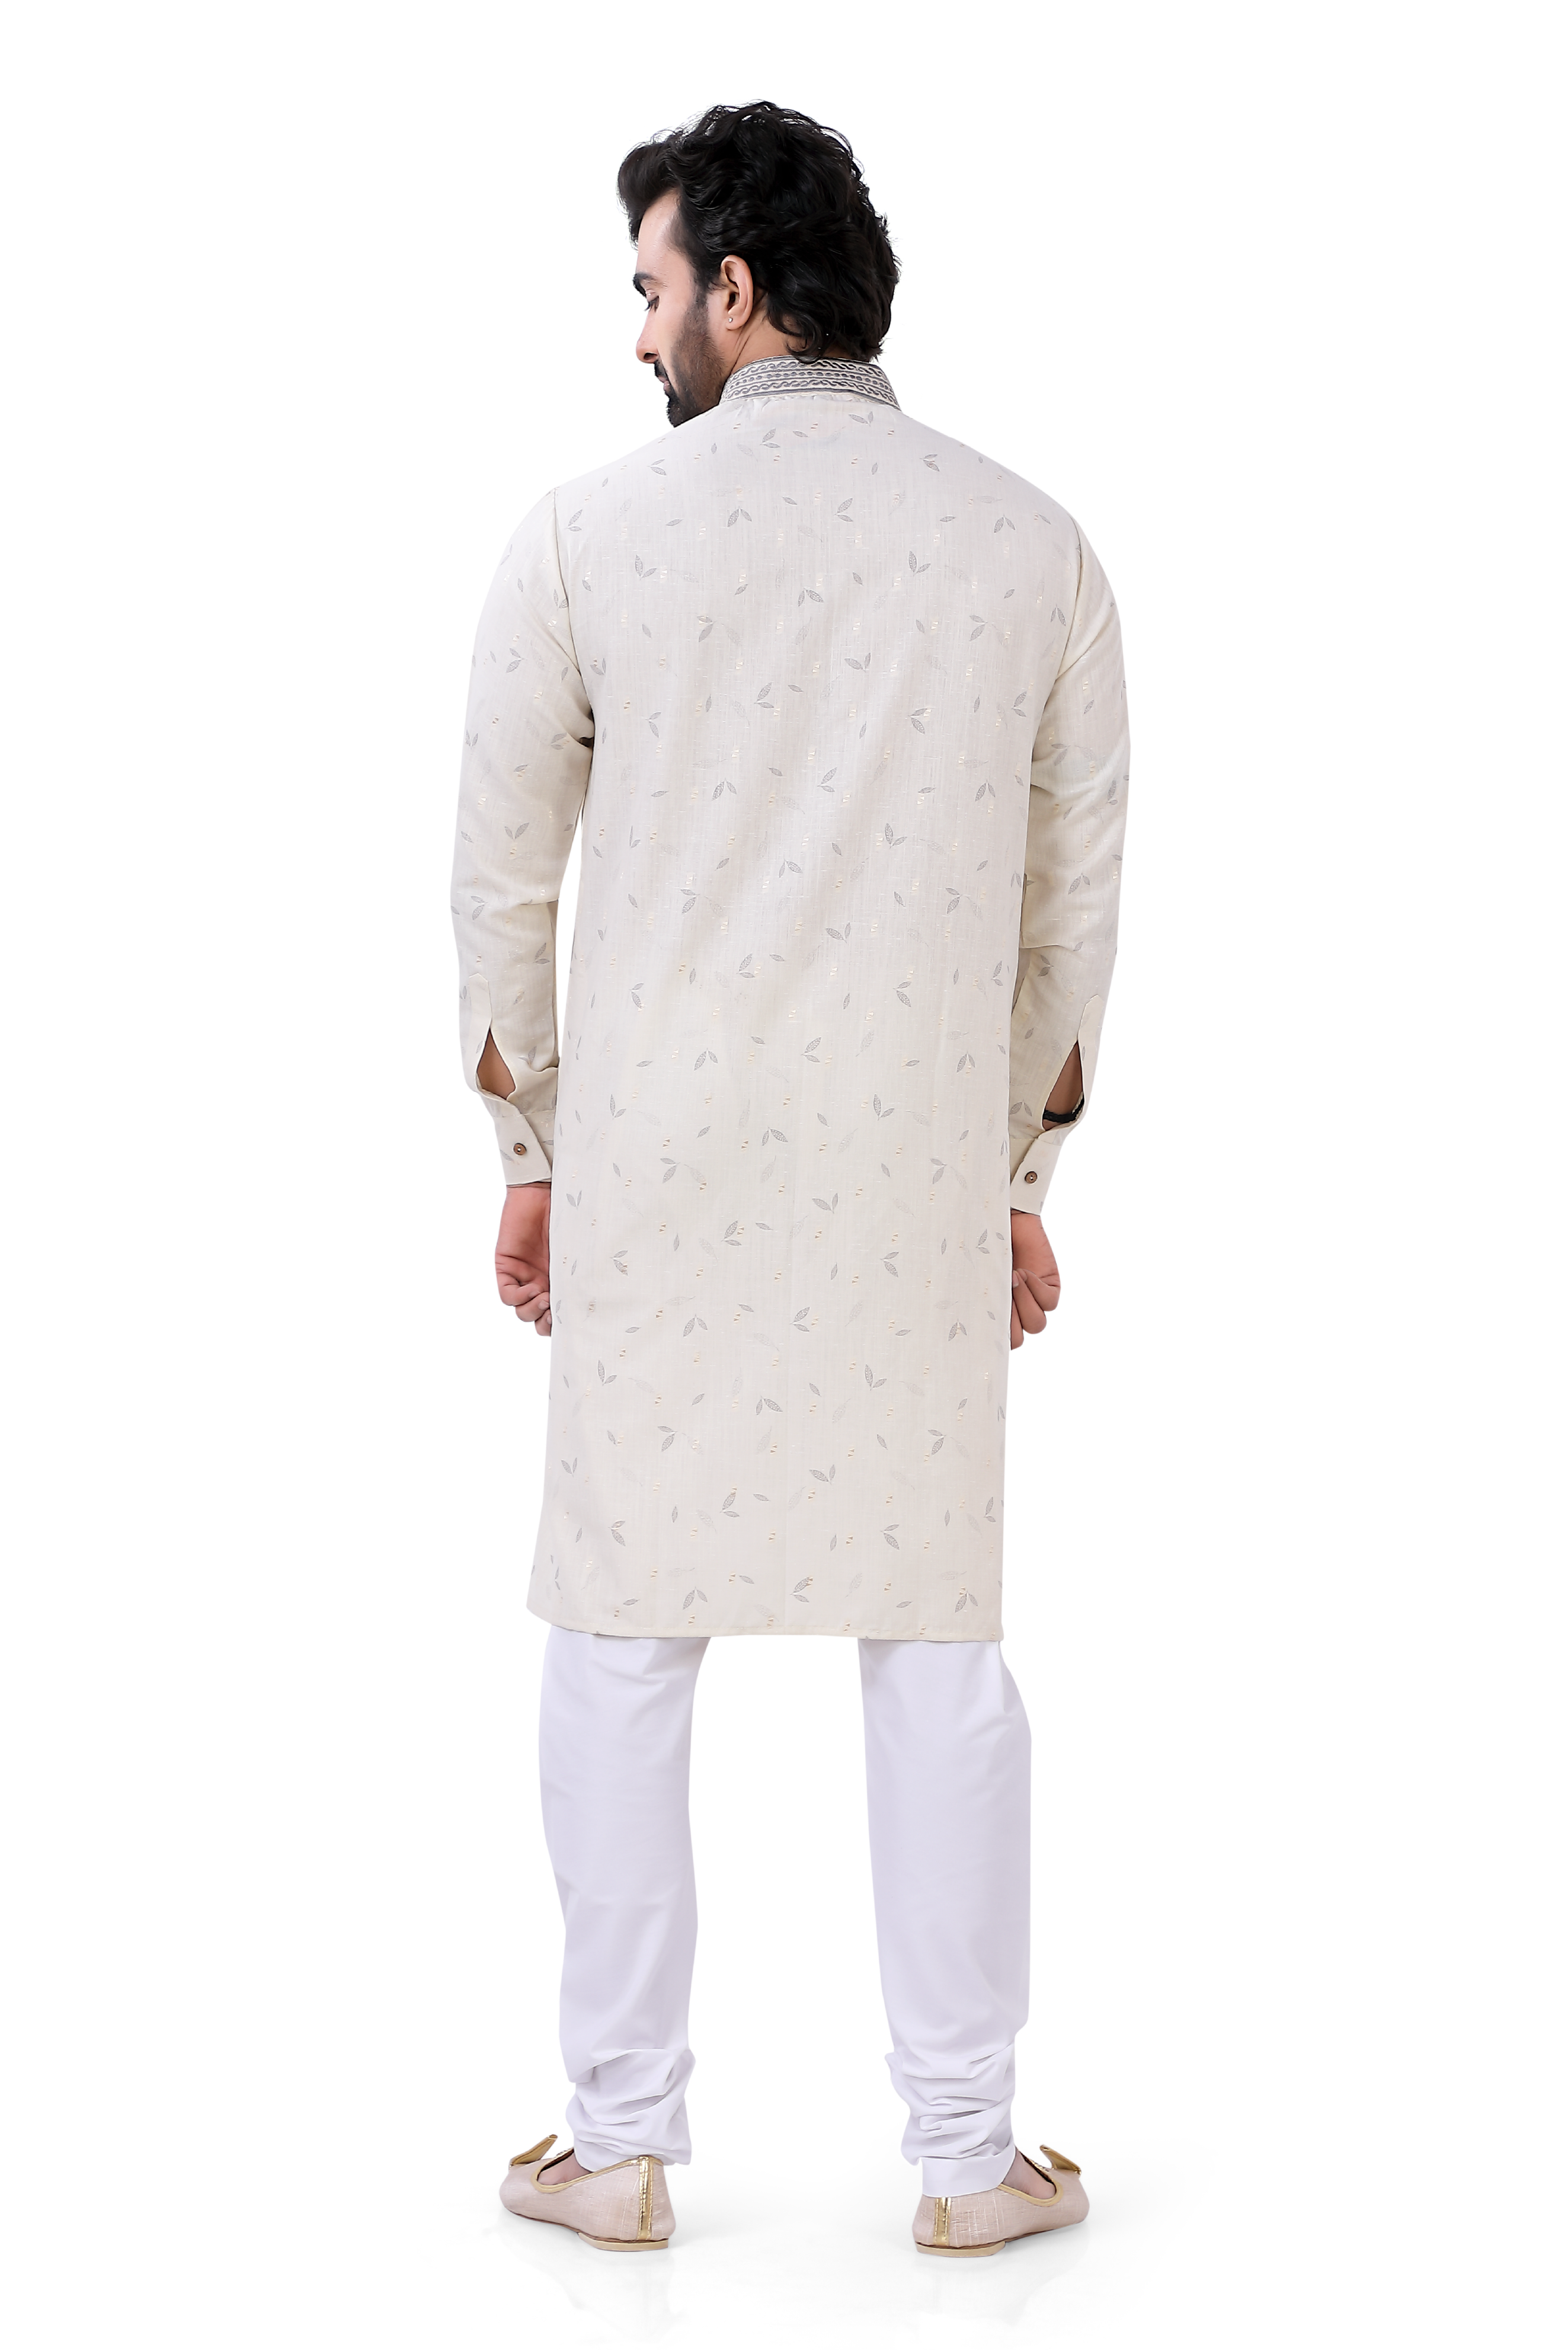 Printed cotton Kurta and Pajama in Cream with embroidery